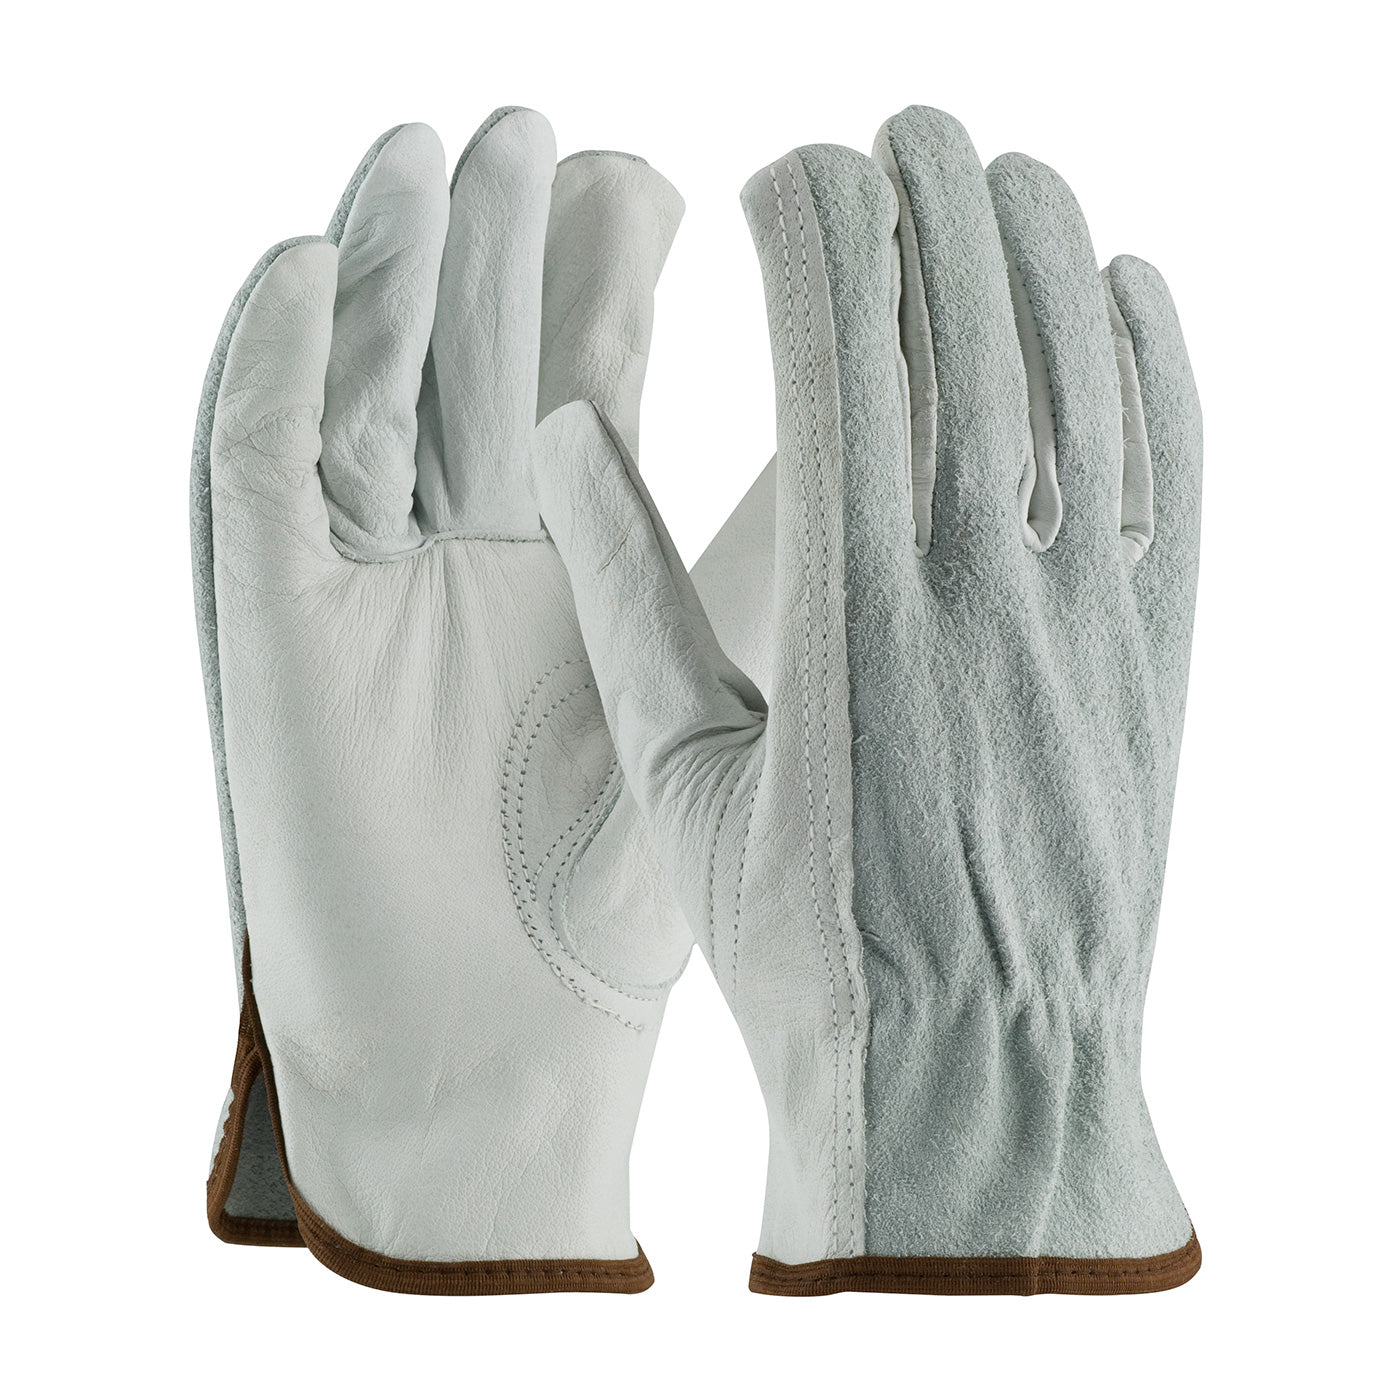 West Chester 993K/M Regular Grade Top Grain Leather Drivers Glove with Split Cowhide Back and Aramid Stitching - Keystone Thumb